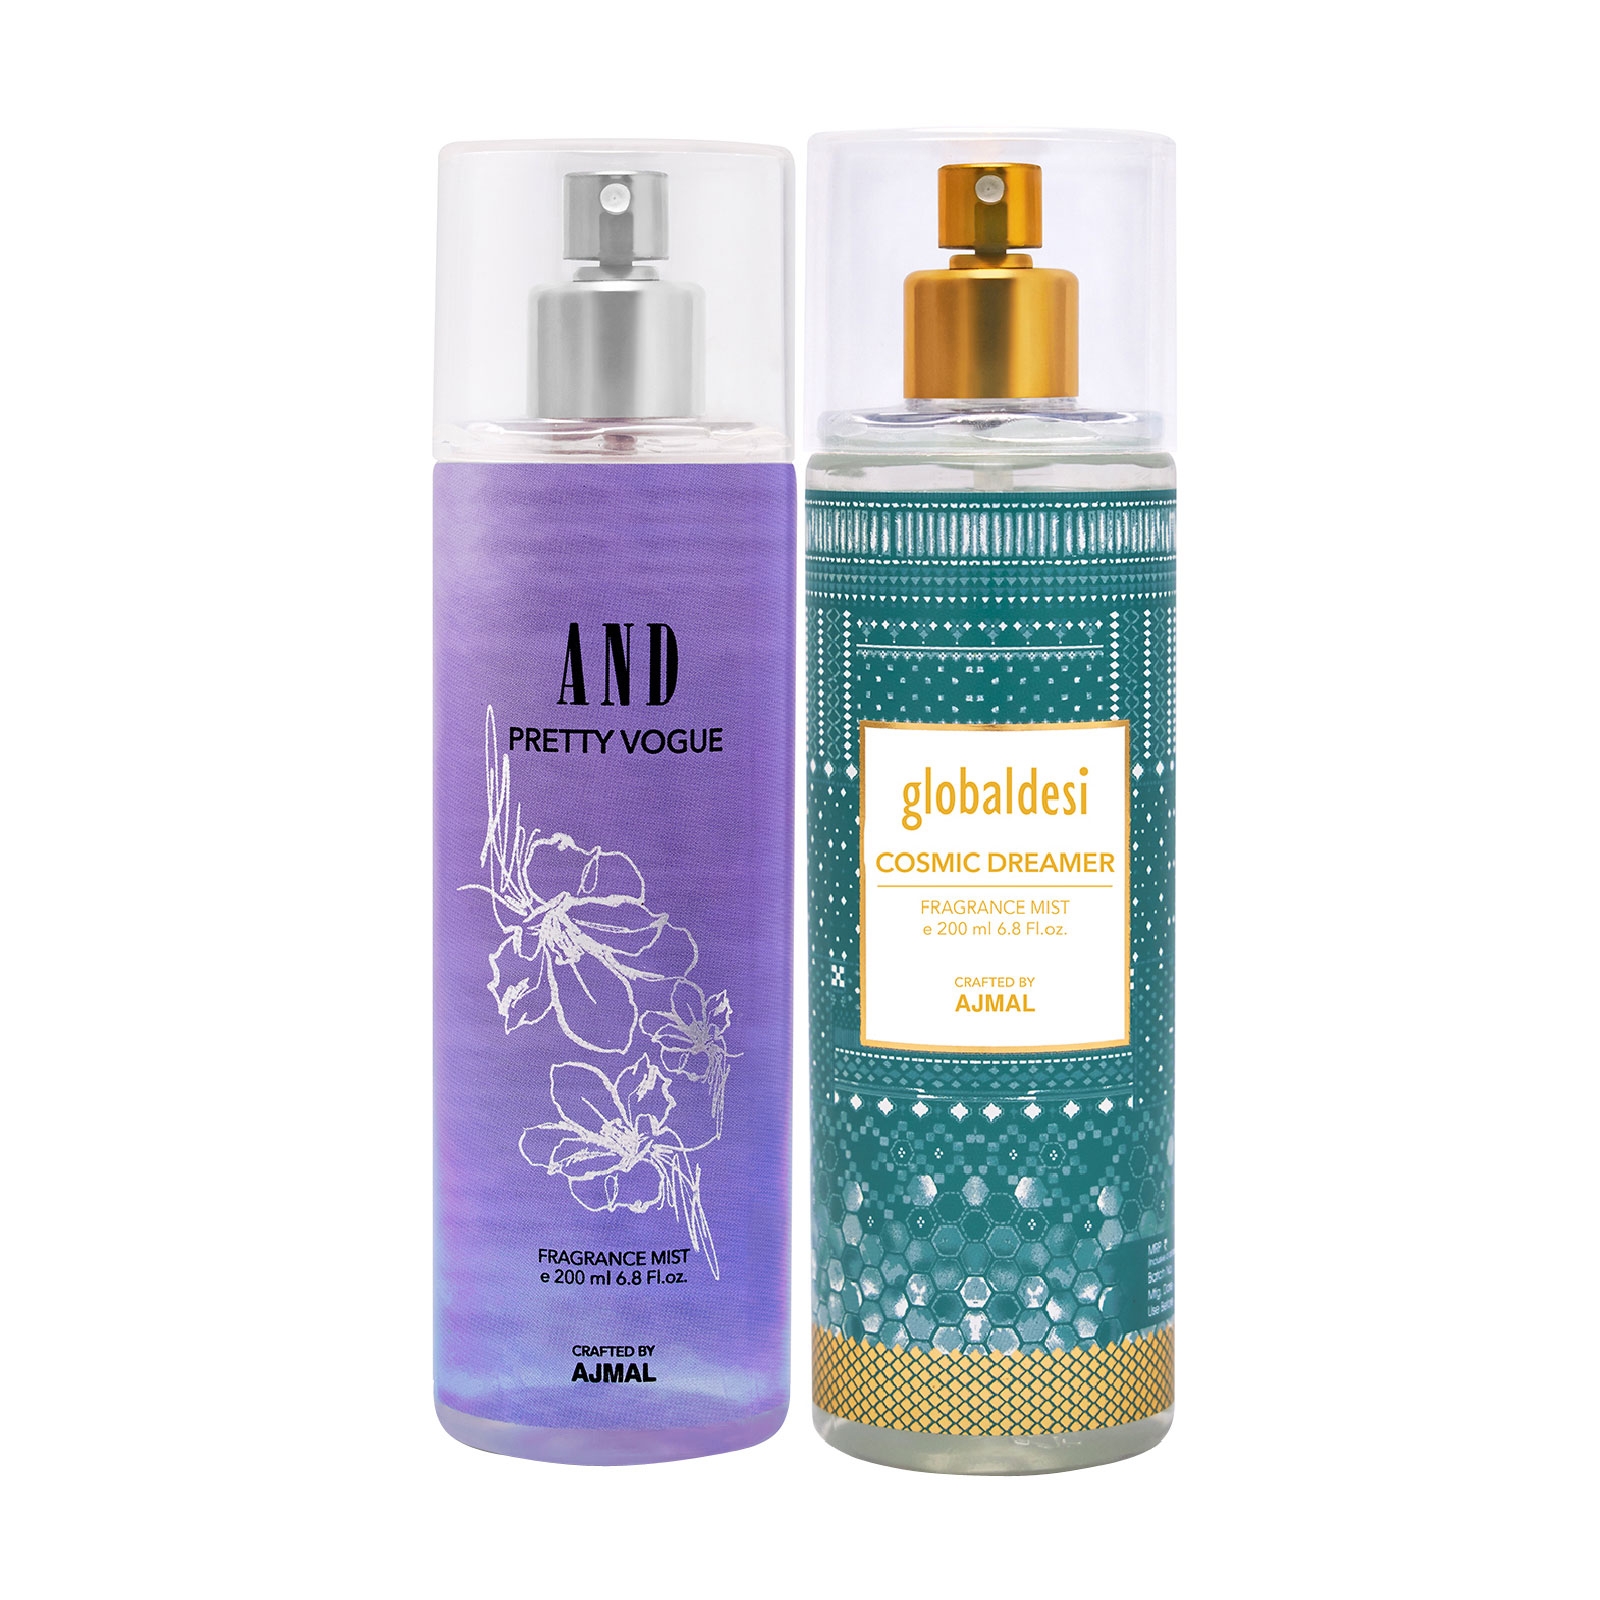 AND Crafted By Ajmal | AND Pretty Vogue Body Mist 200ML & Global Desi Cosmic Dreamer Body Mist 200ML 